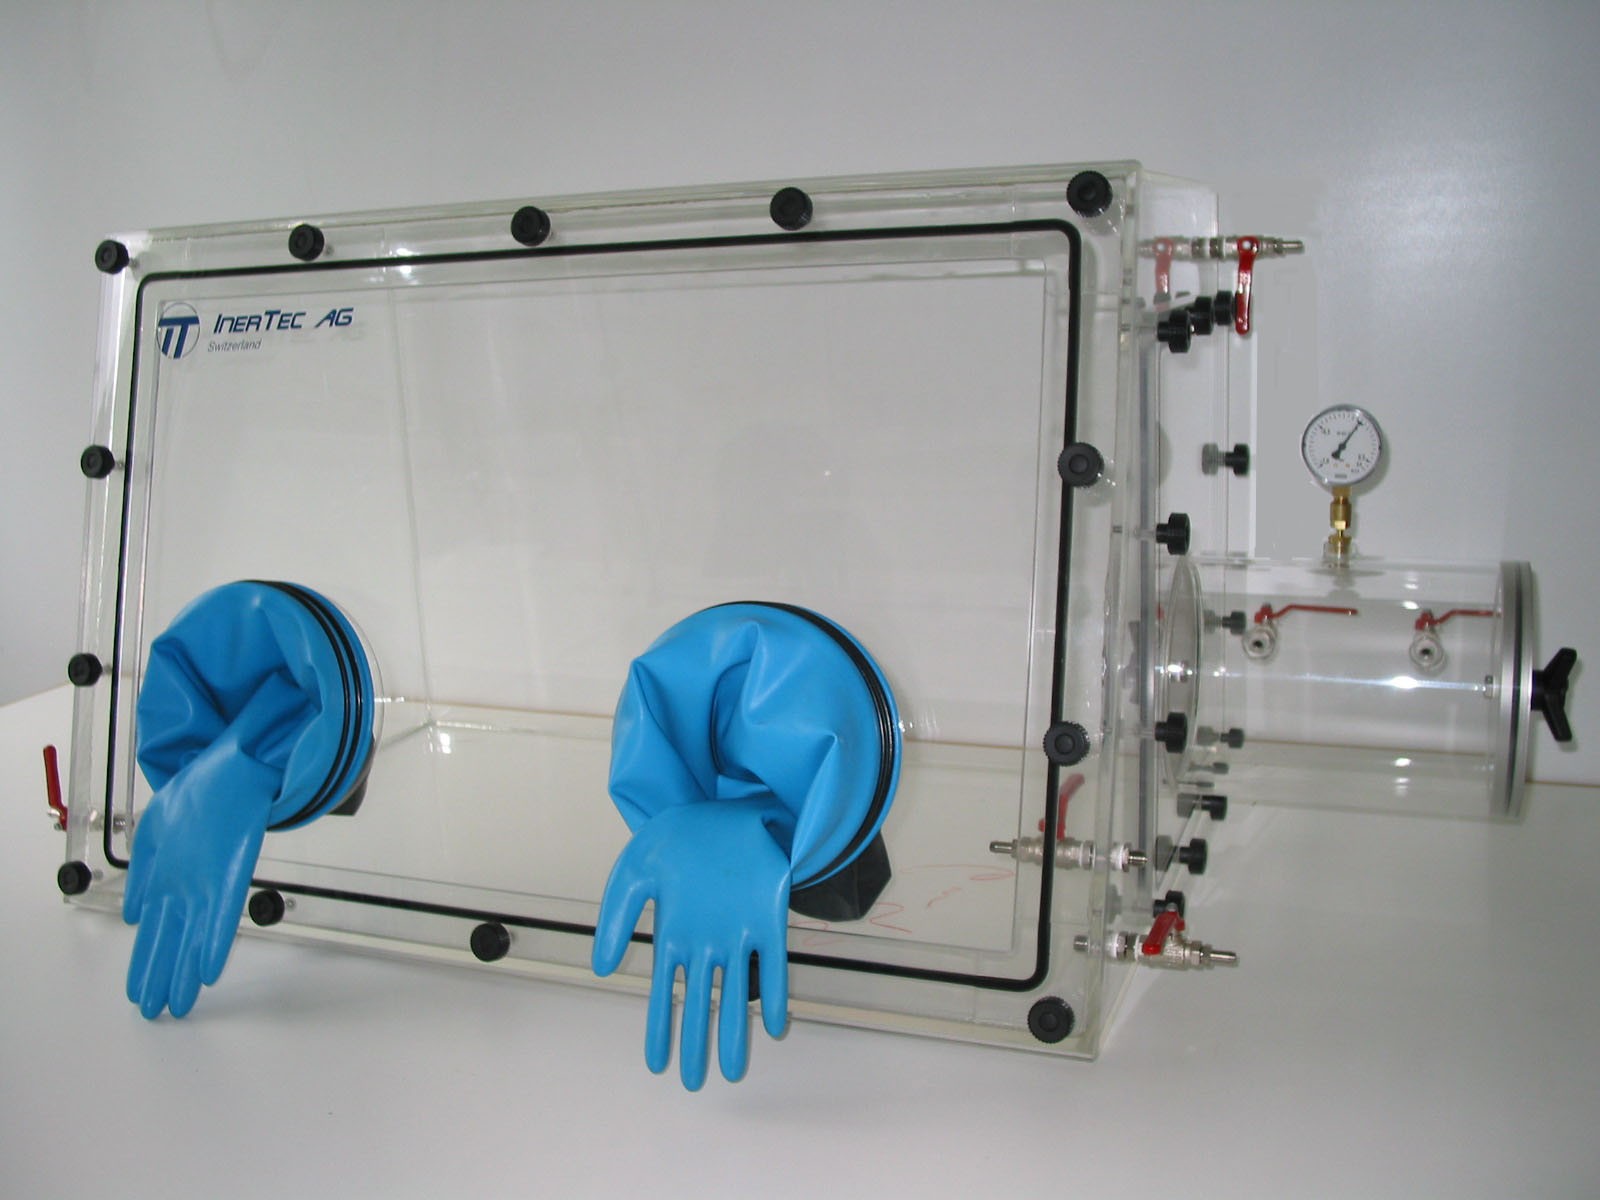 Glovebox made of acrylic&gt; Gas filling: by hand, front design: swivels upwards, side design: hinged doors Control: oxygen and humidity display